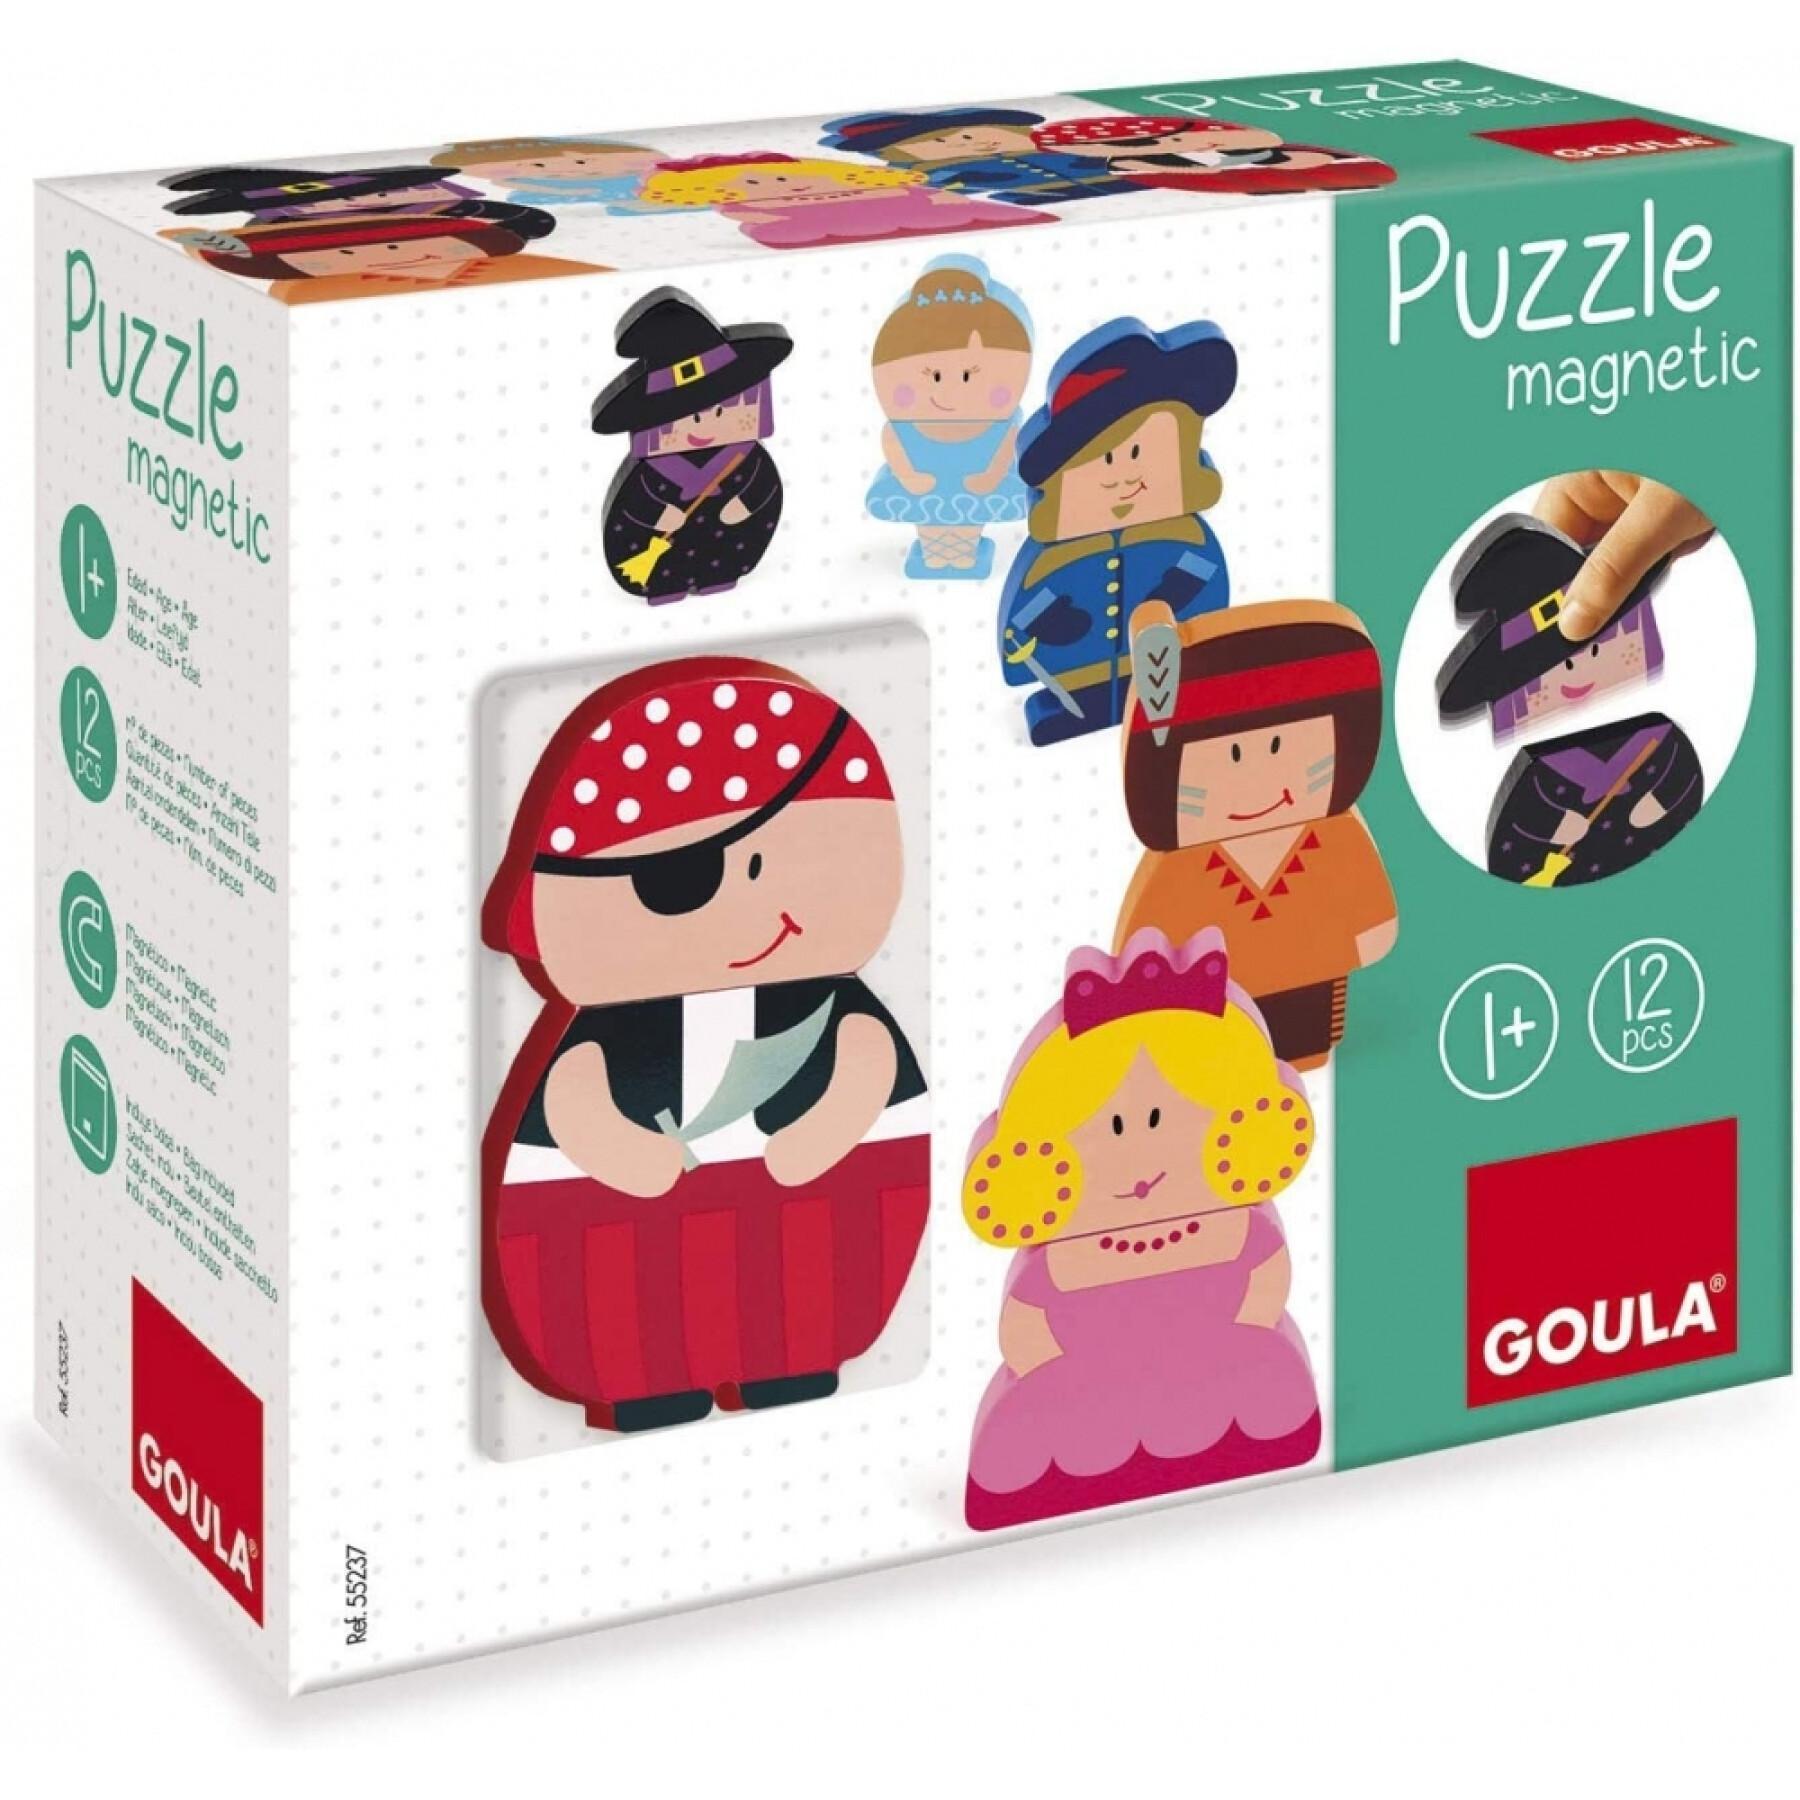 Magnetic puzzle characters Goula